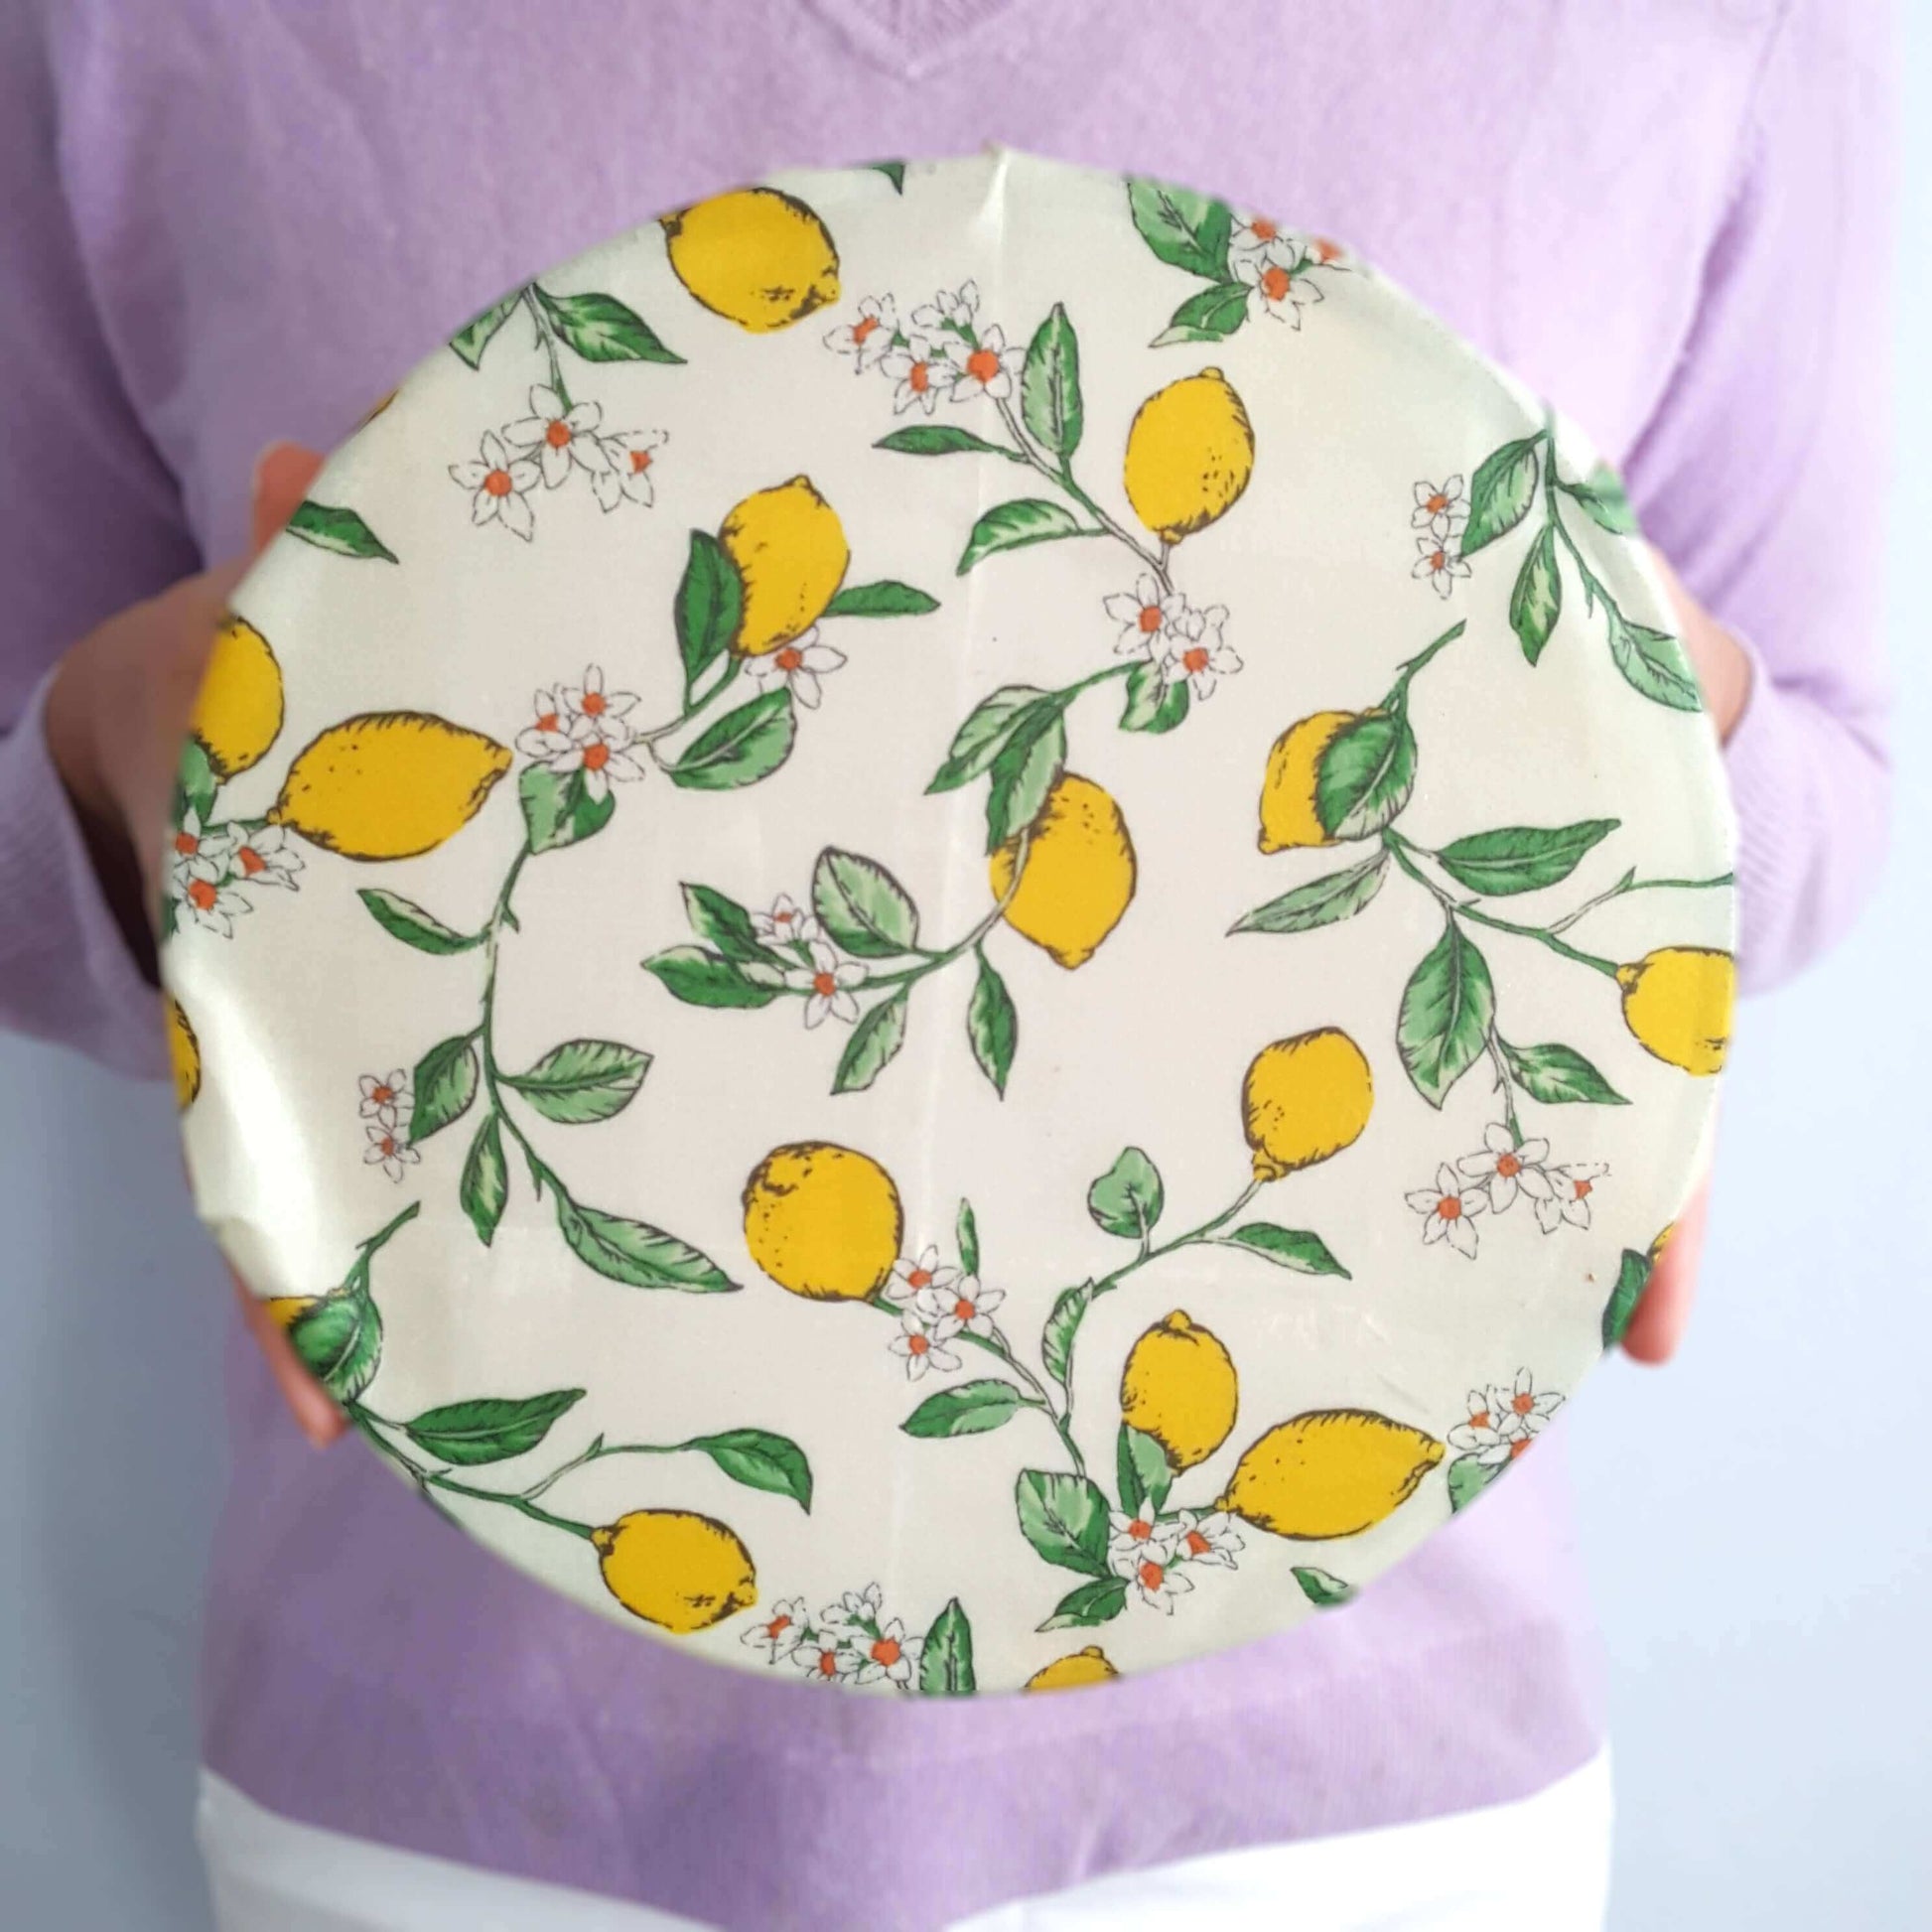 Italian Kitchen Earth Kind Sandwich & Bowl Set of 2 Large Beeswax Wraps